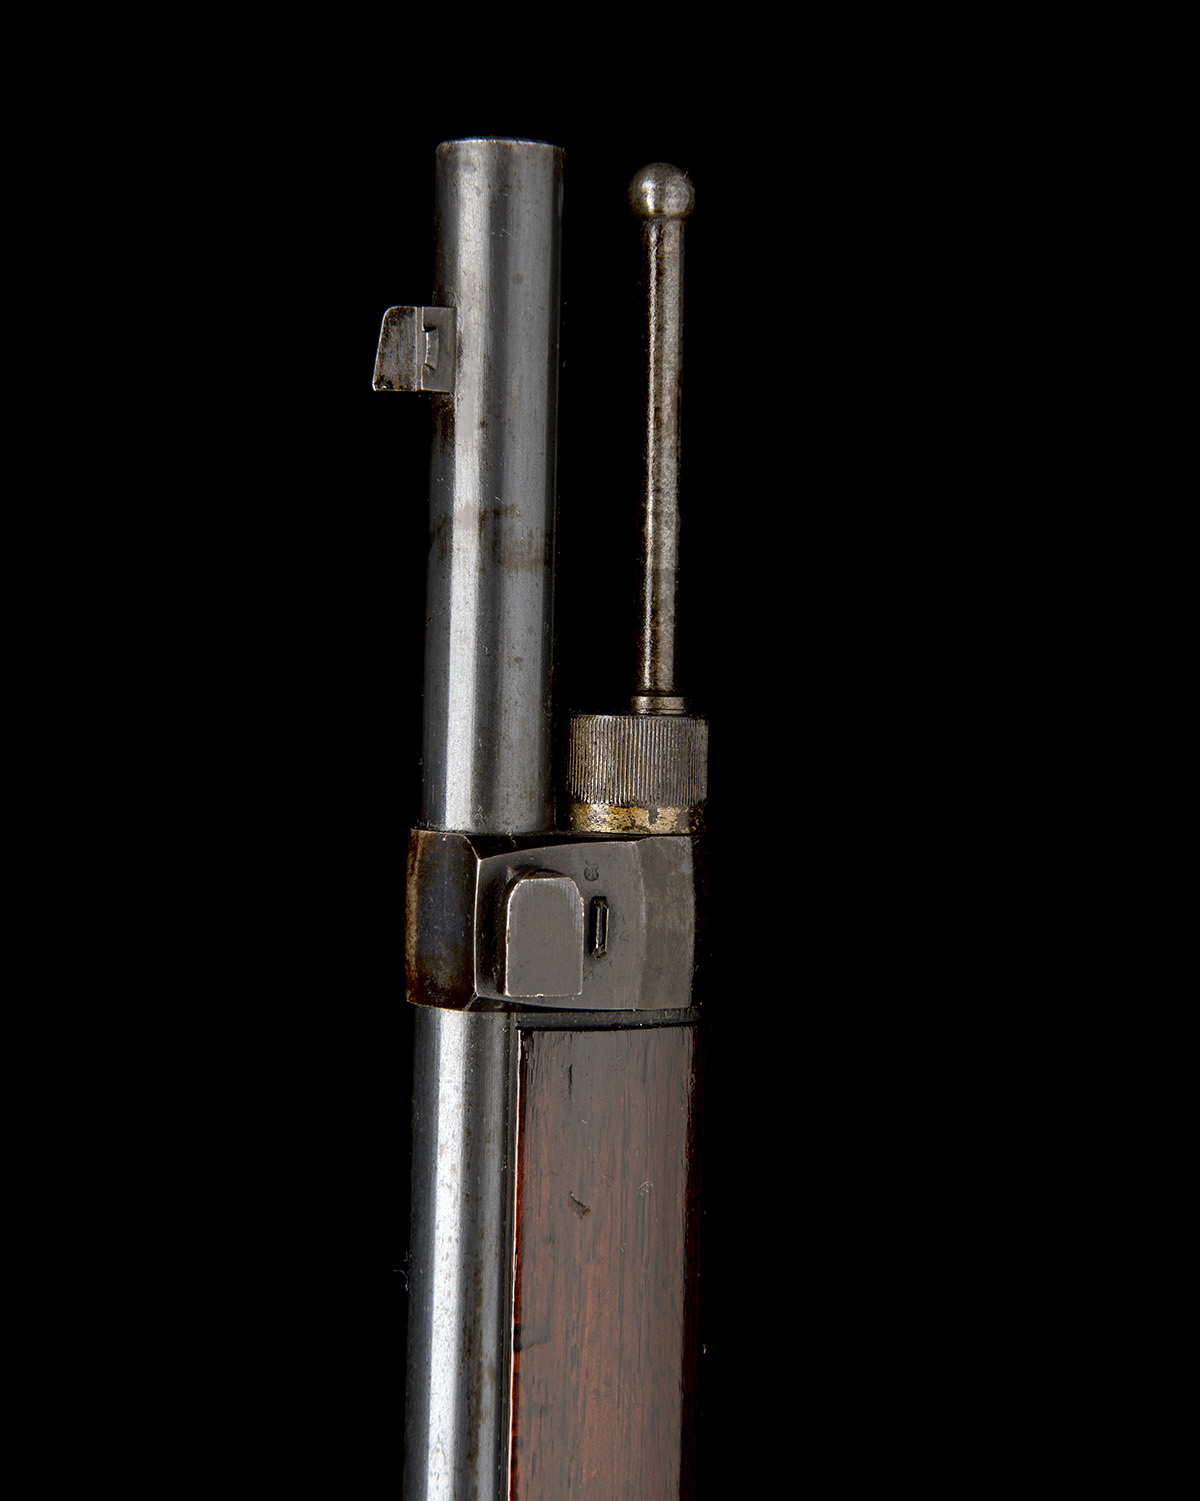 DANZIG ARSENAL, GERMANY AN 11mm (MAUSER COMMISSION) BOLT-ACTION REPEATING RIFLE MODEL 'MAUSER M71/ - Image 6 of 7